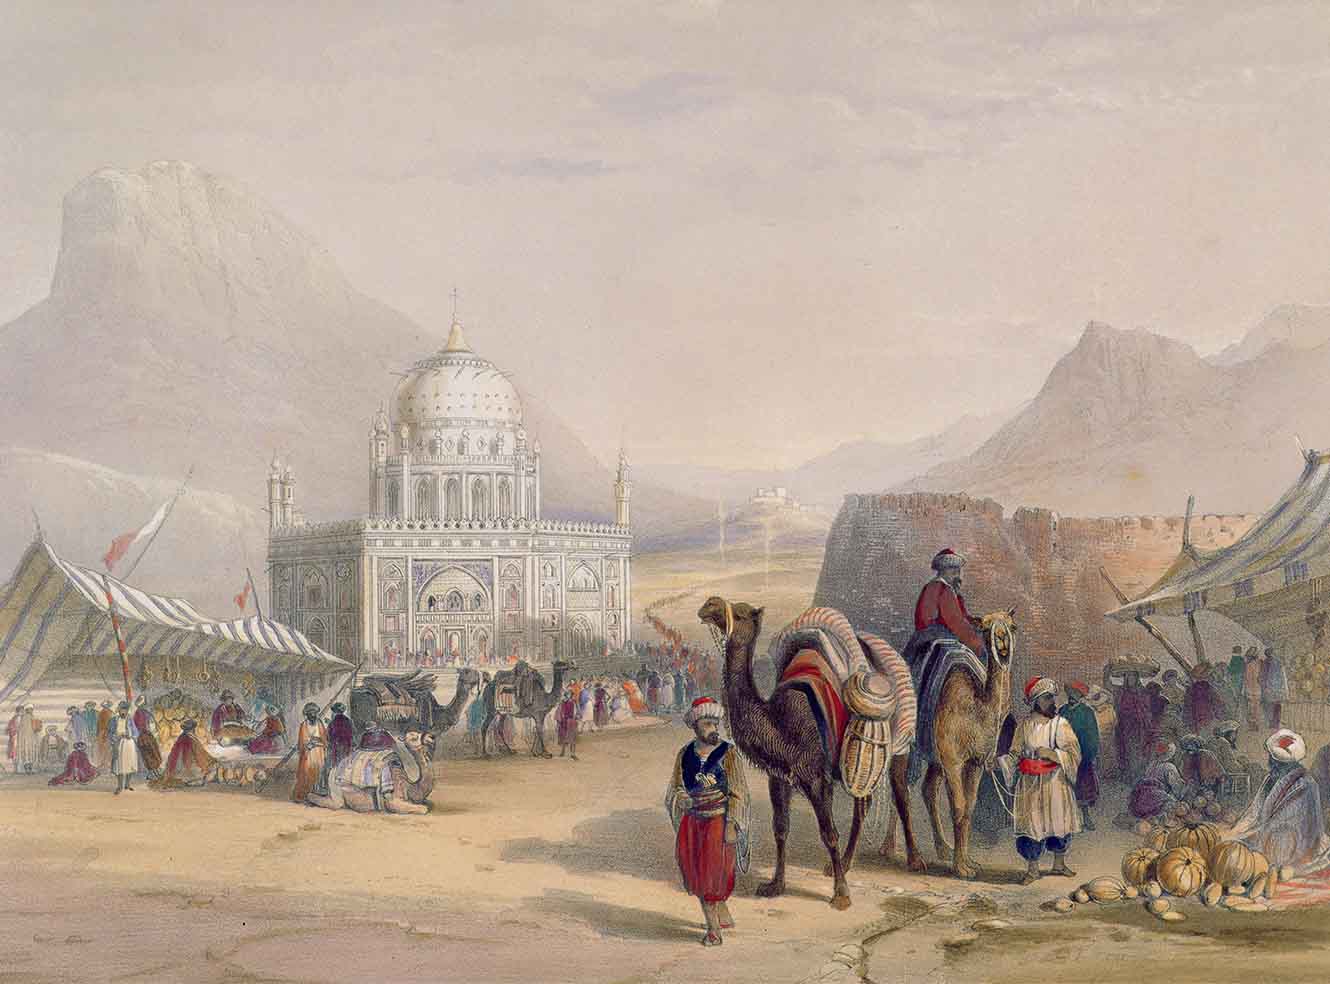 Archives Direct: Central Asia, Persia and Afghanistan, 1834-1922